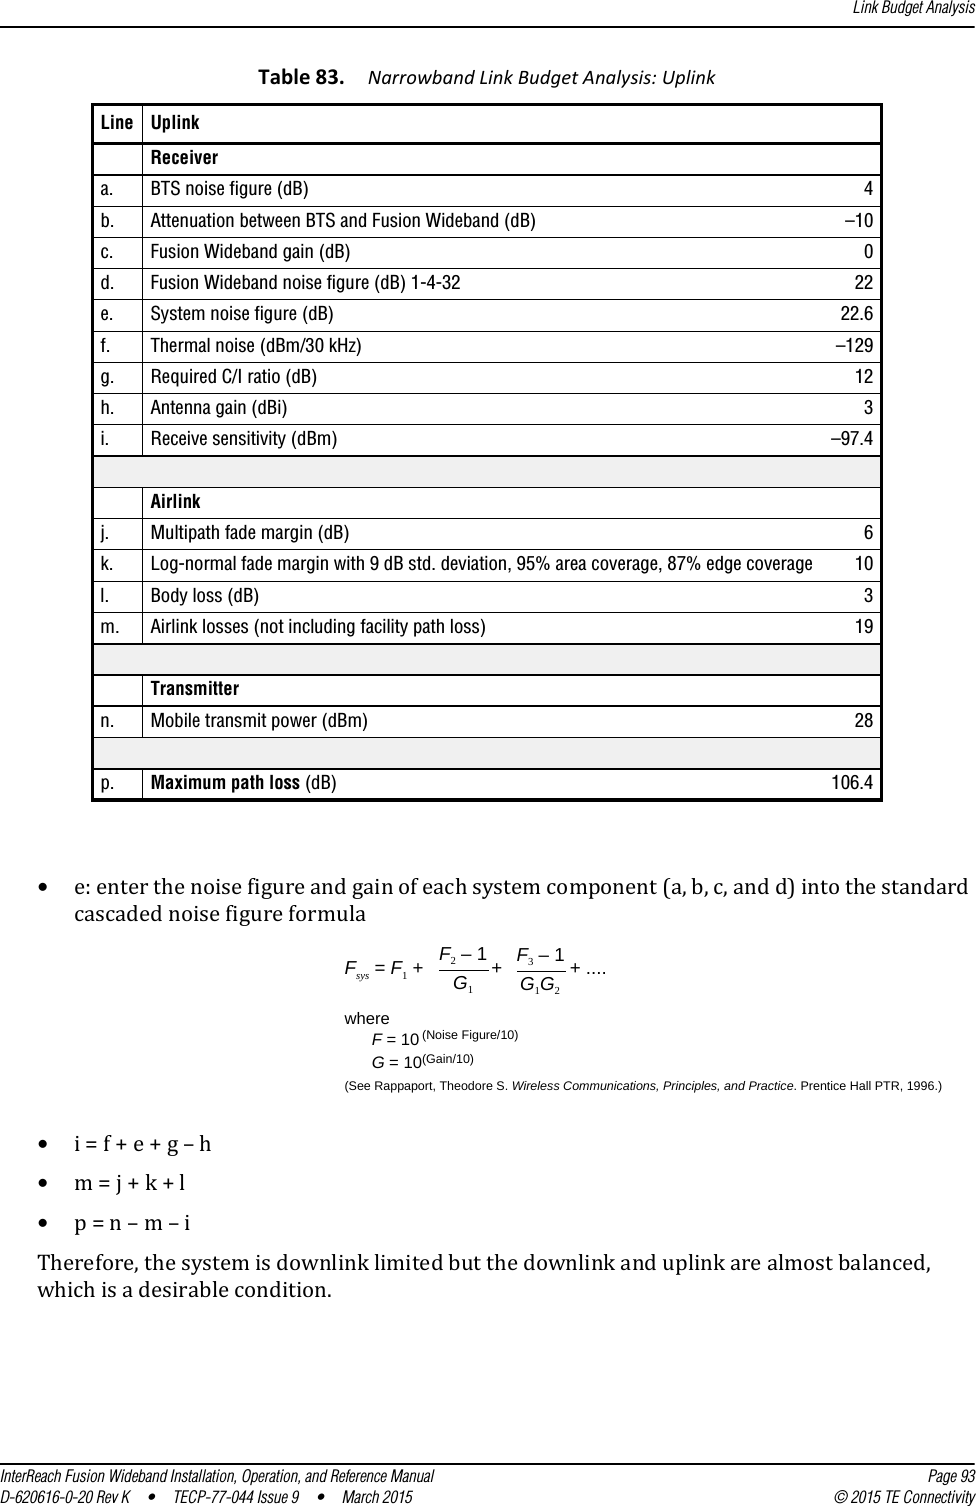 Link Budget AnalysisInterReach Fusion Wideband Installation, Operation, and Reference Manual Page 93D-620616-0-20 Rev K  •  TECP-77-044 Issue 9  •  March 2015 © 2015 TE Connectivity•e: enter the noise figure and gain of each system component (a, b, c, and d) into the standard cascaded noise figure formula•i = f + e + g – h•m = j + k + l•p = n – m – iTherefore, the system is downlink limited but the downlink and uplink are almost balanced, which is a desirable condition.Table 83. Narrowband Link Budget Analysis: UplinkLine UplinkReceiver a. BTS noise figure (dB) 4b. Attenuation between BTS and Fusion Wideband (dB) –10c. Fusion Wideband gain (dB) 0d. Fusion Wideband noise figure (dB) 1-4-32 22e. System noise figure (dB) 22.6f. Thermal noise (dBm/30 kHz) –129g. Required C/I ratio (dB) 12h. Antenna gain (dBi) 3i. Receive sensitivity (dBm) –97.4Airlink j. Multipath fade margin (dB) 6k. Log-normal fade margin with 9 dB std. deviation, 95% area coverage, 87% edge coverage 10l. Body loss (dB) 3m. Airlink losses (not including facility path loss) 19Transmitter n. Mobile transmit power (dBm) 28p. Maximum path loss (dB) 106.4Fsys = F1 + + + ....F2 – 1G1F3 – 1G1G2whereF = 10(See Rappaport, Theodore S. Wireless Communications, Principles, and Practice. Prentice Hall PTR, 1996.)(Noise Figure/10)G = 10(Gain/10)